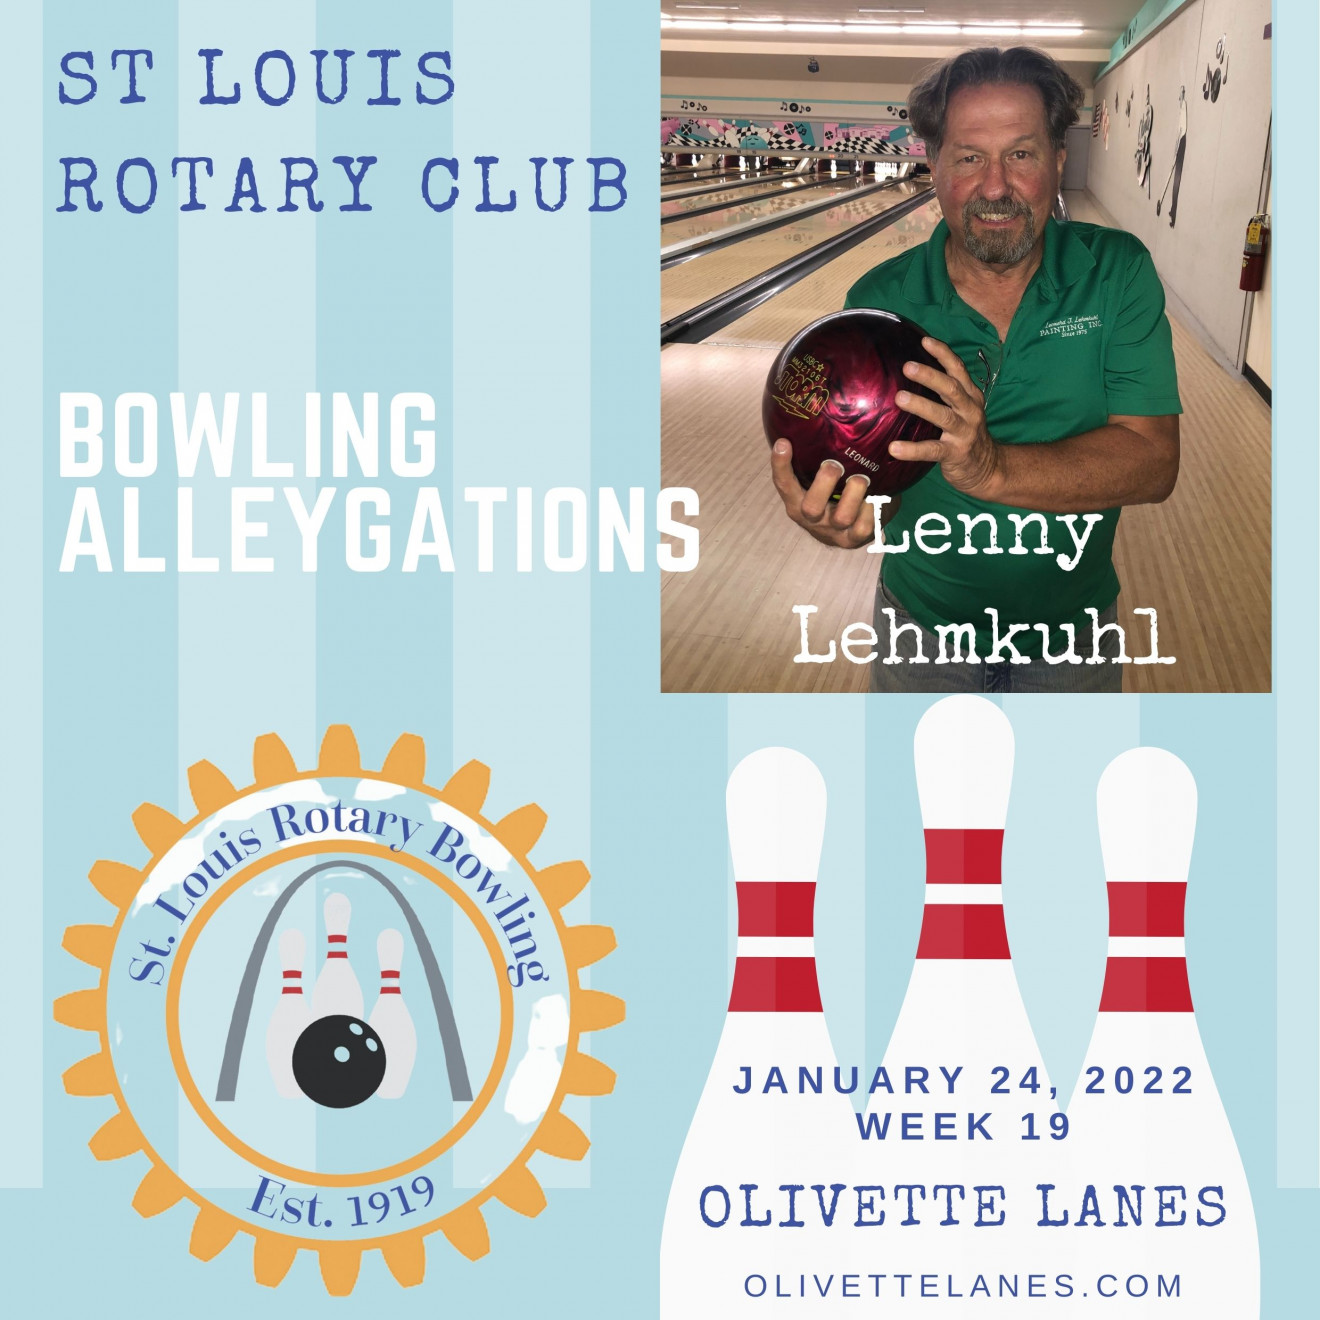 Lenny Lehmkuhl with bowling alleygations for 1-24-22, week 19